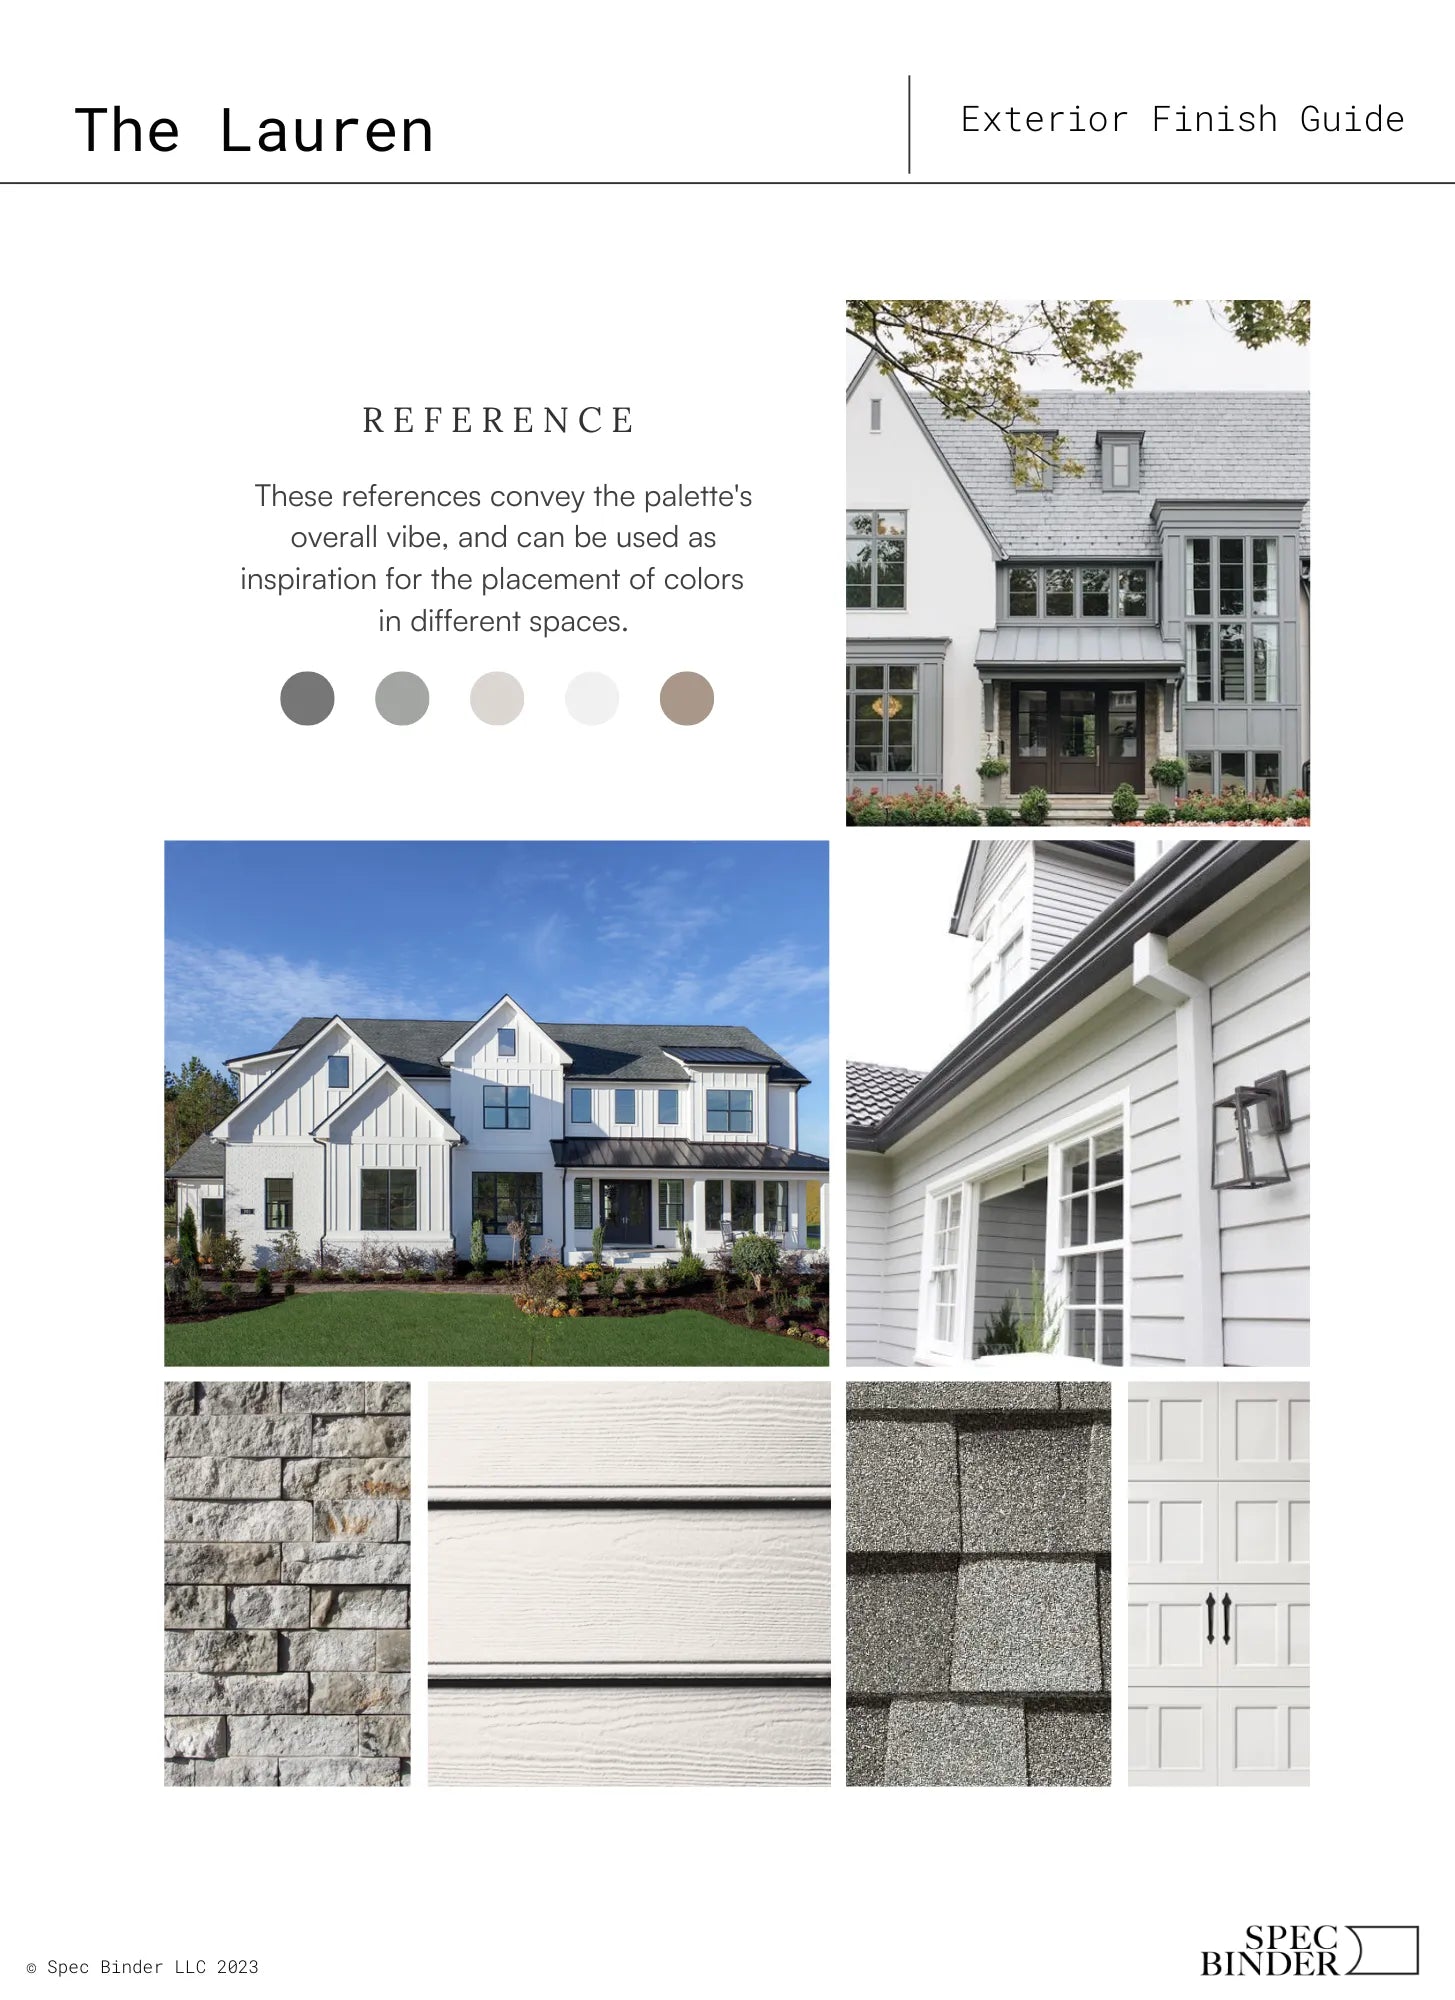 See photos of The Lauren paint colors in different spaces.The Lauren Exterior reference images, paint samples, color swatches, and design elements. The Lauren bathroom design is Soft, Bright, Simple, and Versatile. The Lauren 